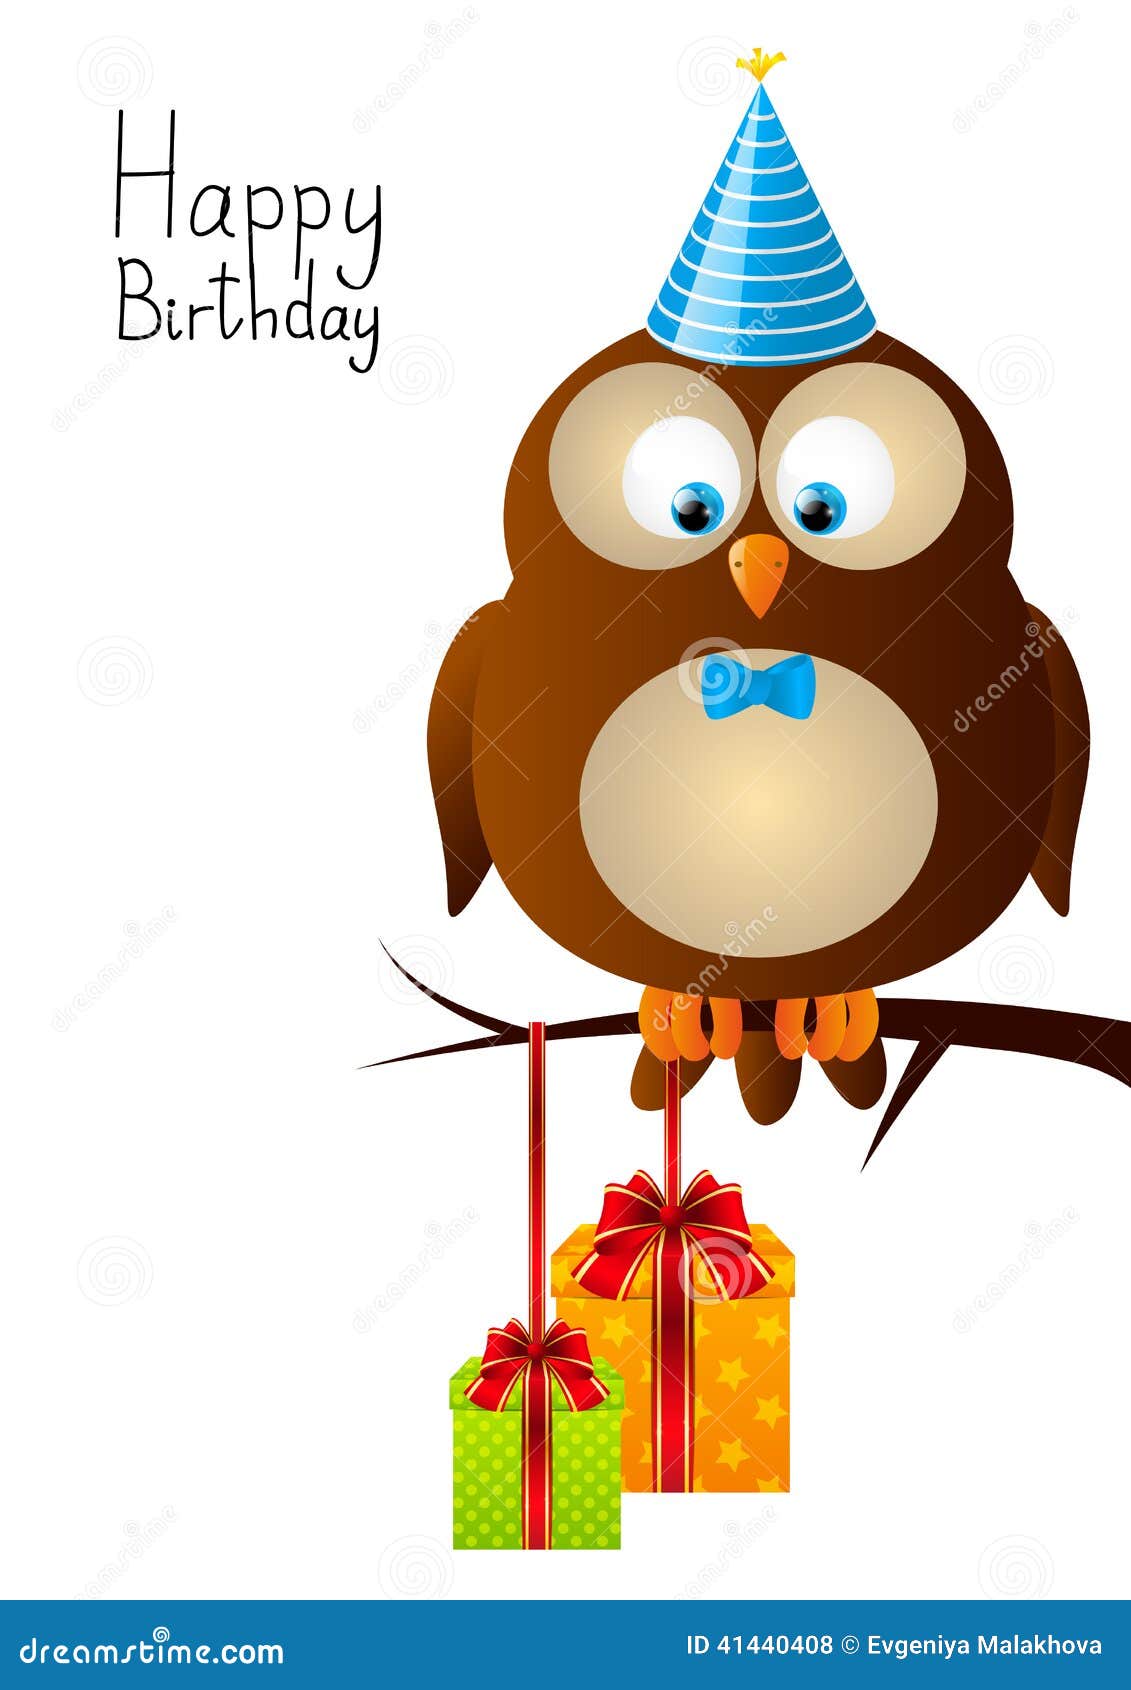 Cute Birthday owl stock vector. Illustration of party - 41440408